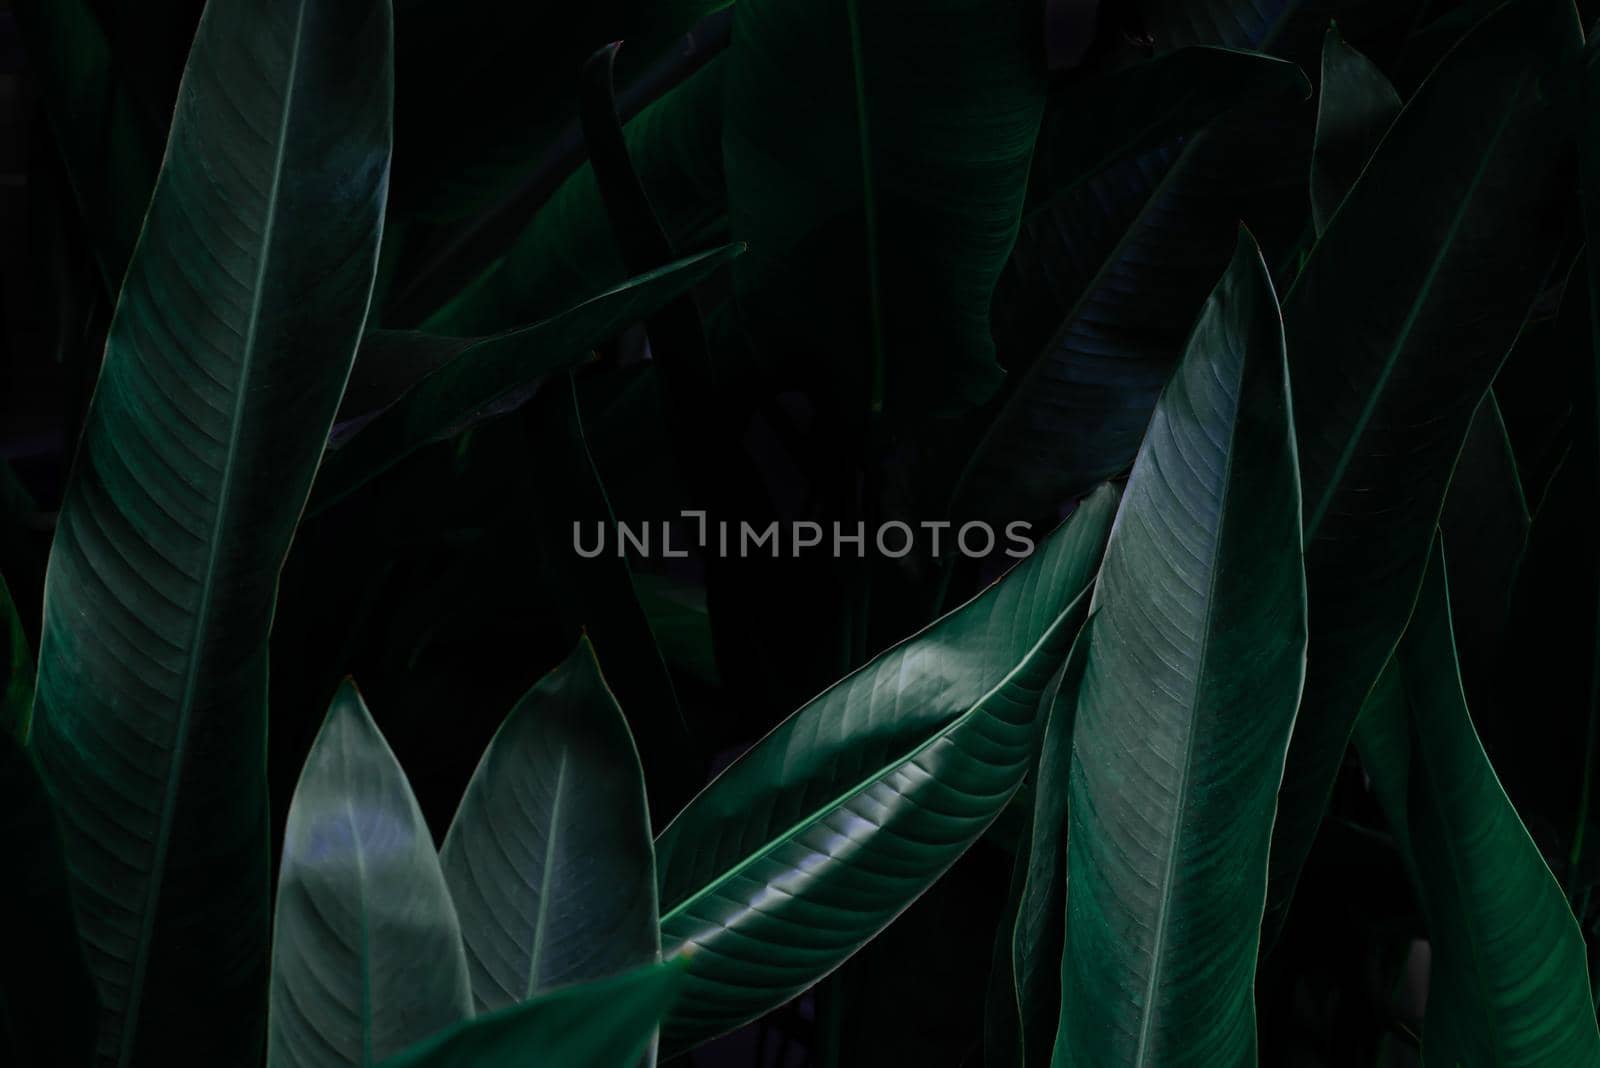 Tropical leaf, large foliage, abstract green texture, nature background.